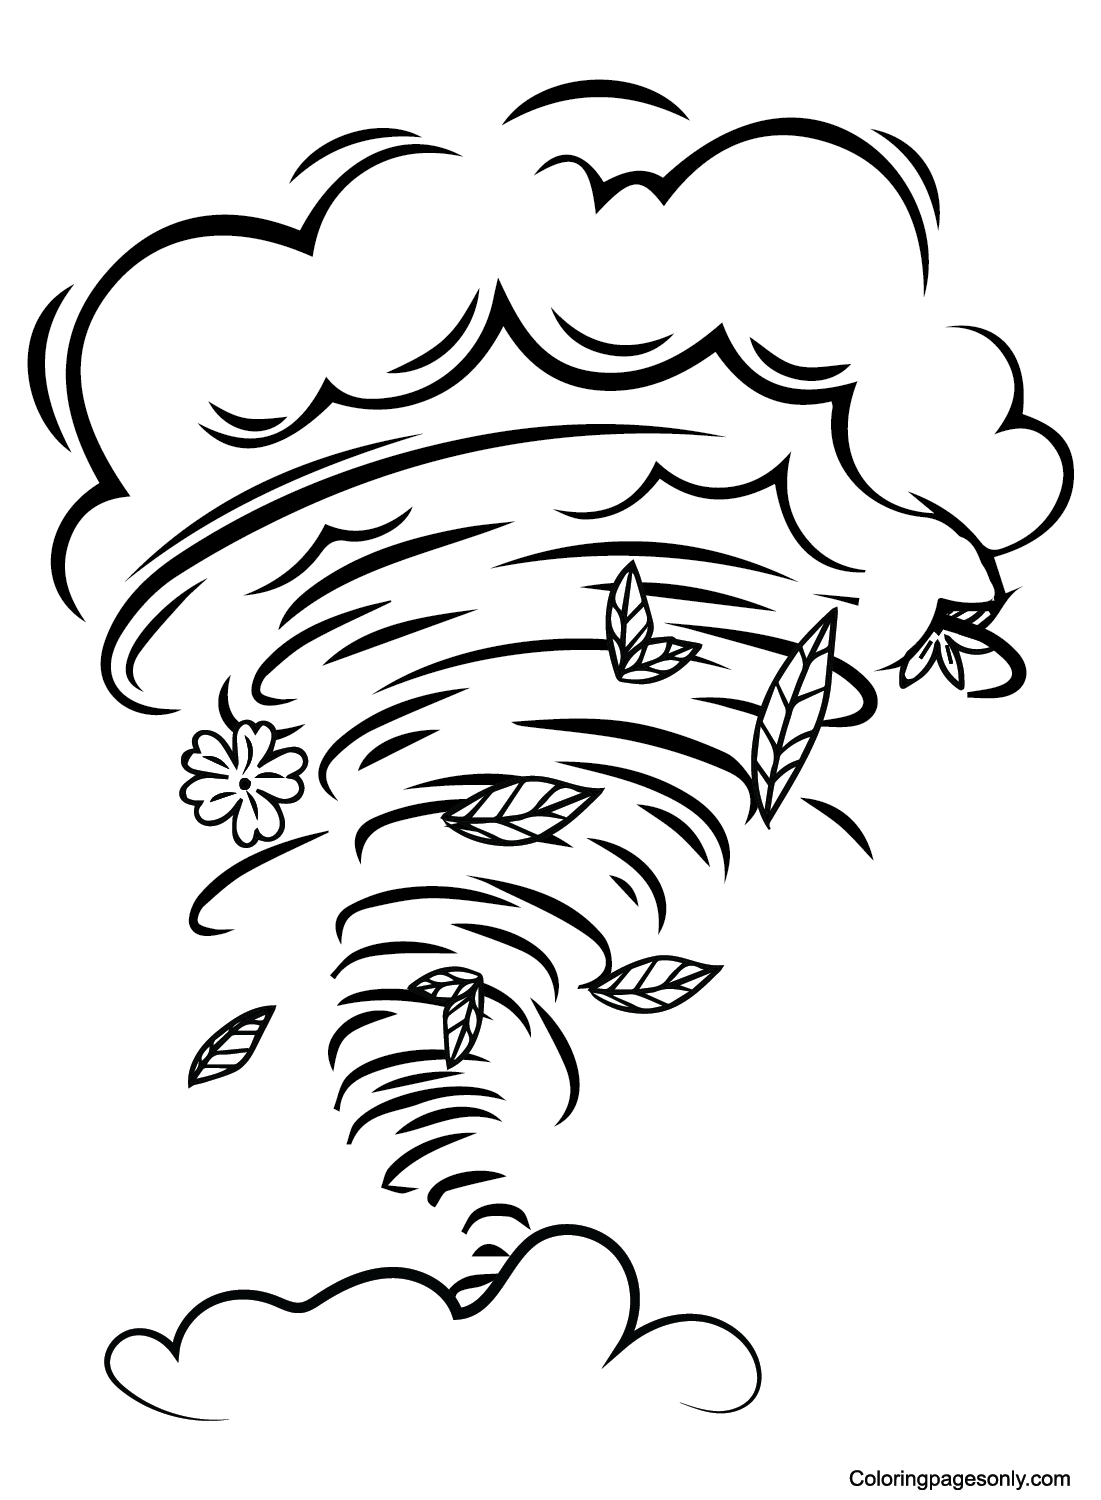 Tornado Pictures Coloring Page